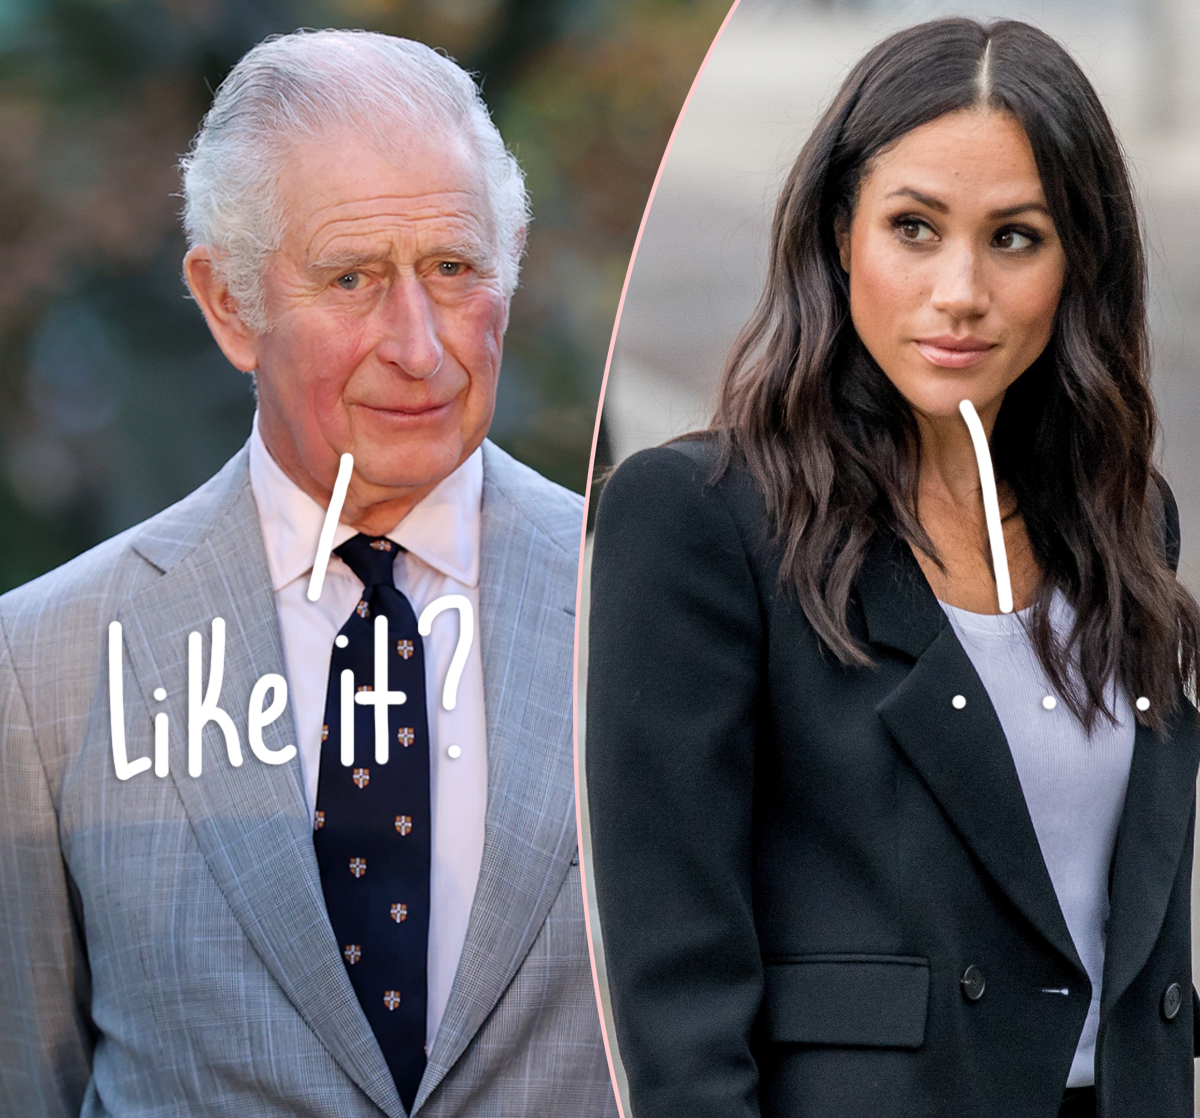 #Shade Or No Shade?? King Charles’ Nickname For Meghan Markle Could Go Either Way…